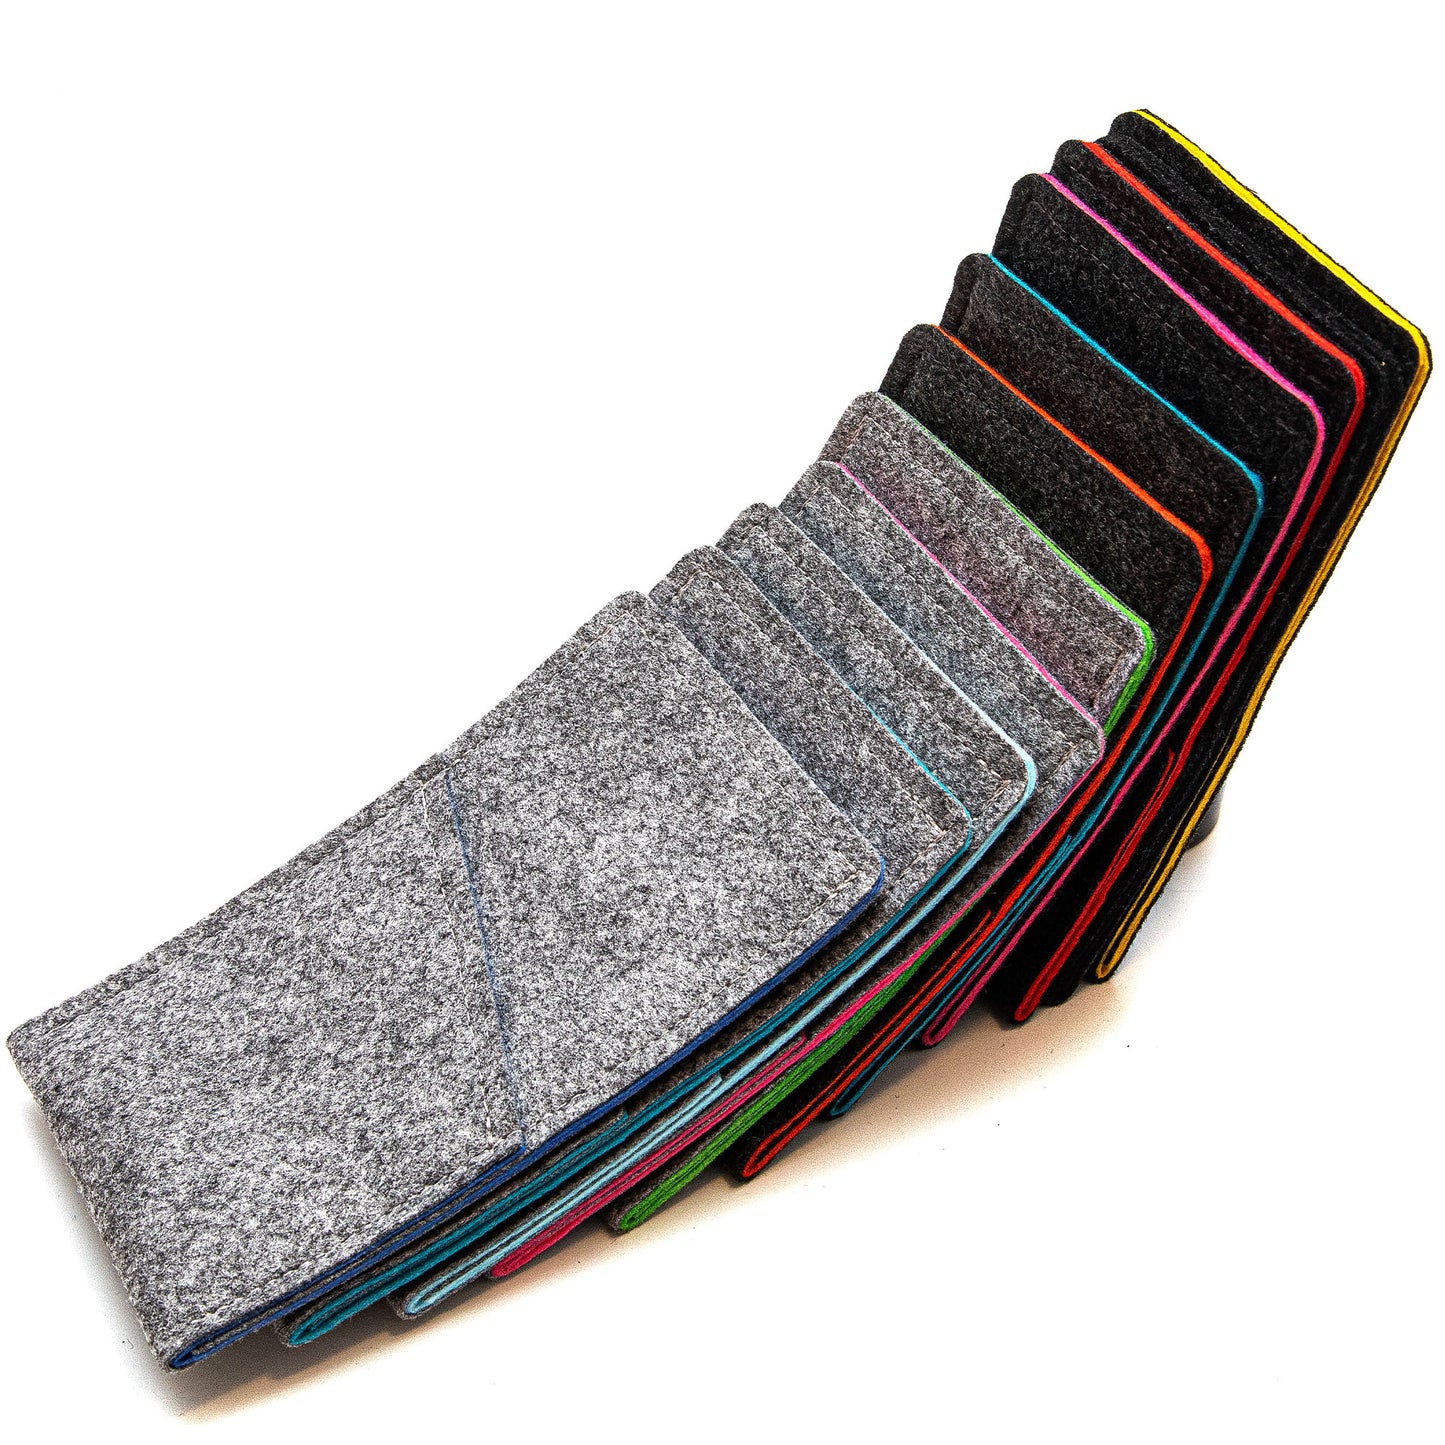 Premium Felt iPhone Sleeve with Card Pocket - Charcoal & Turquoise